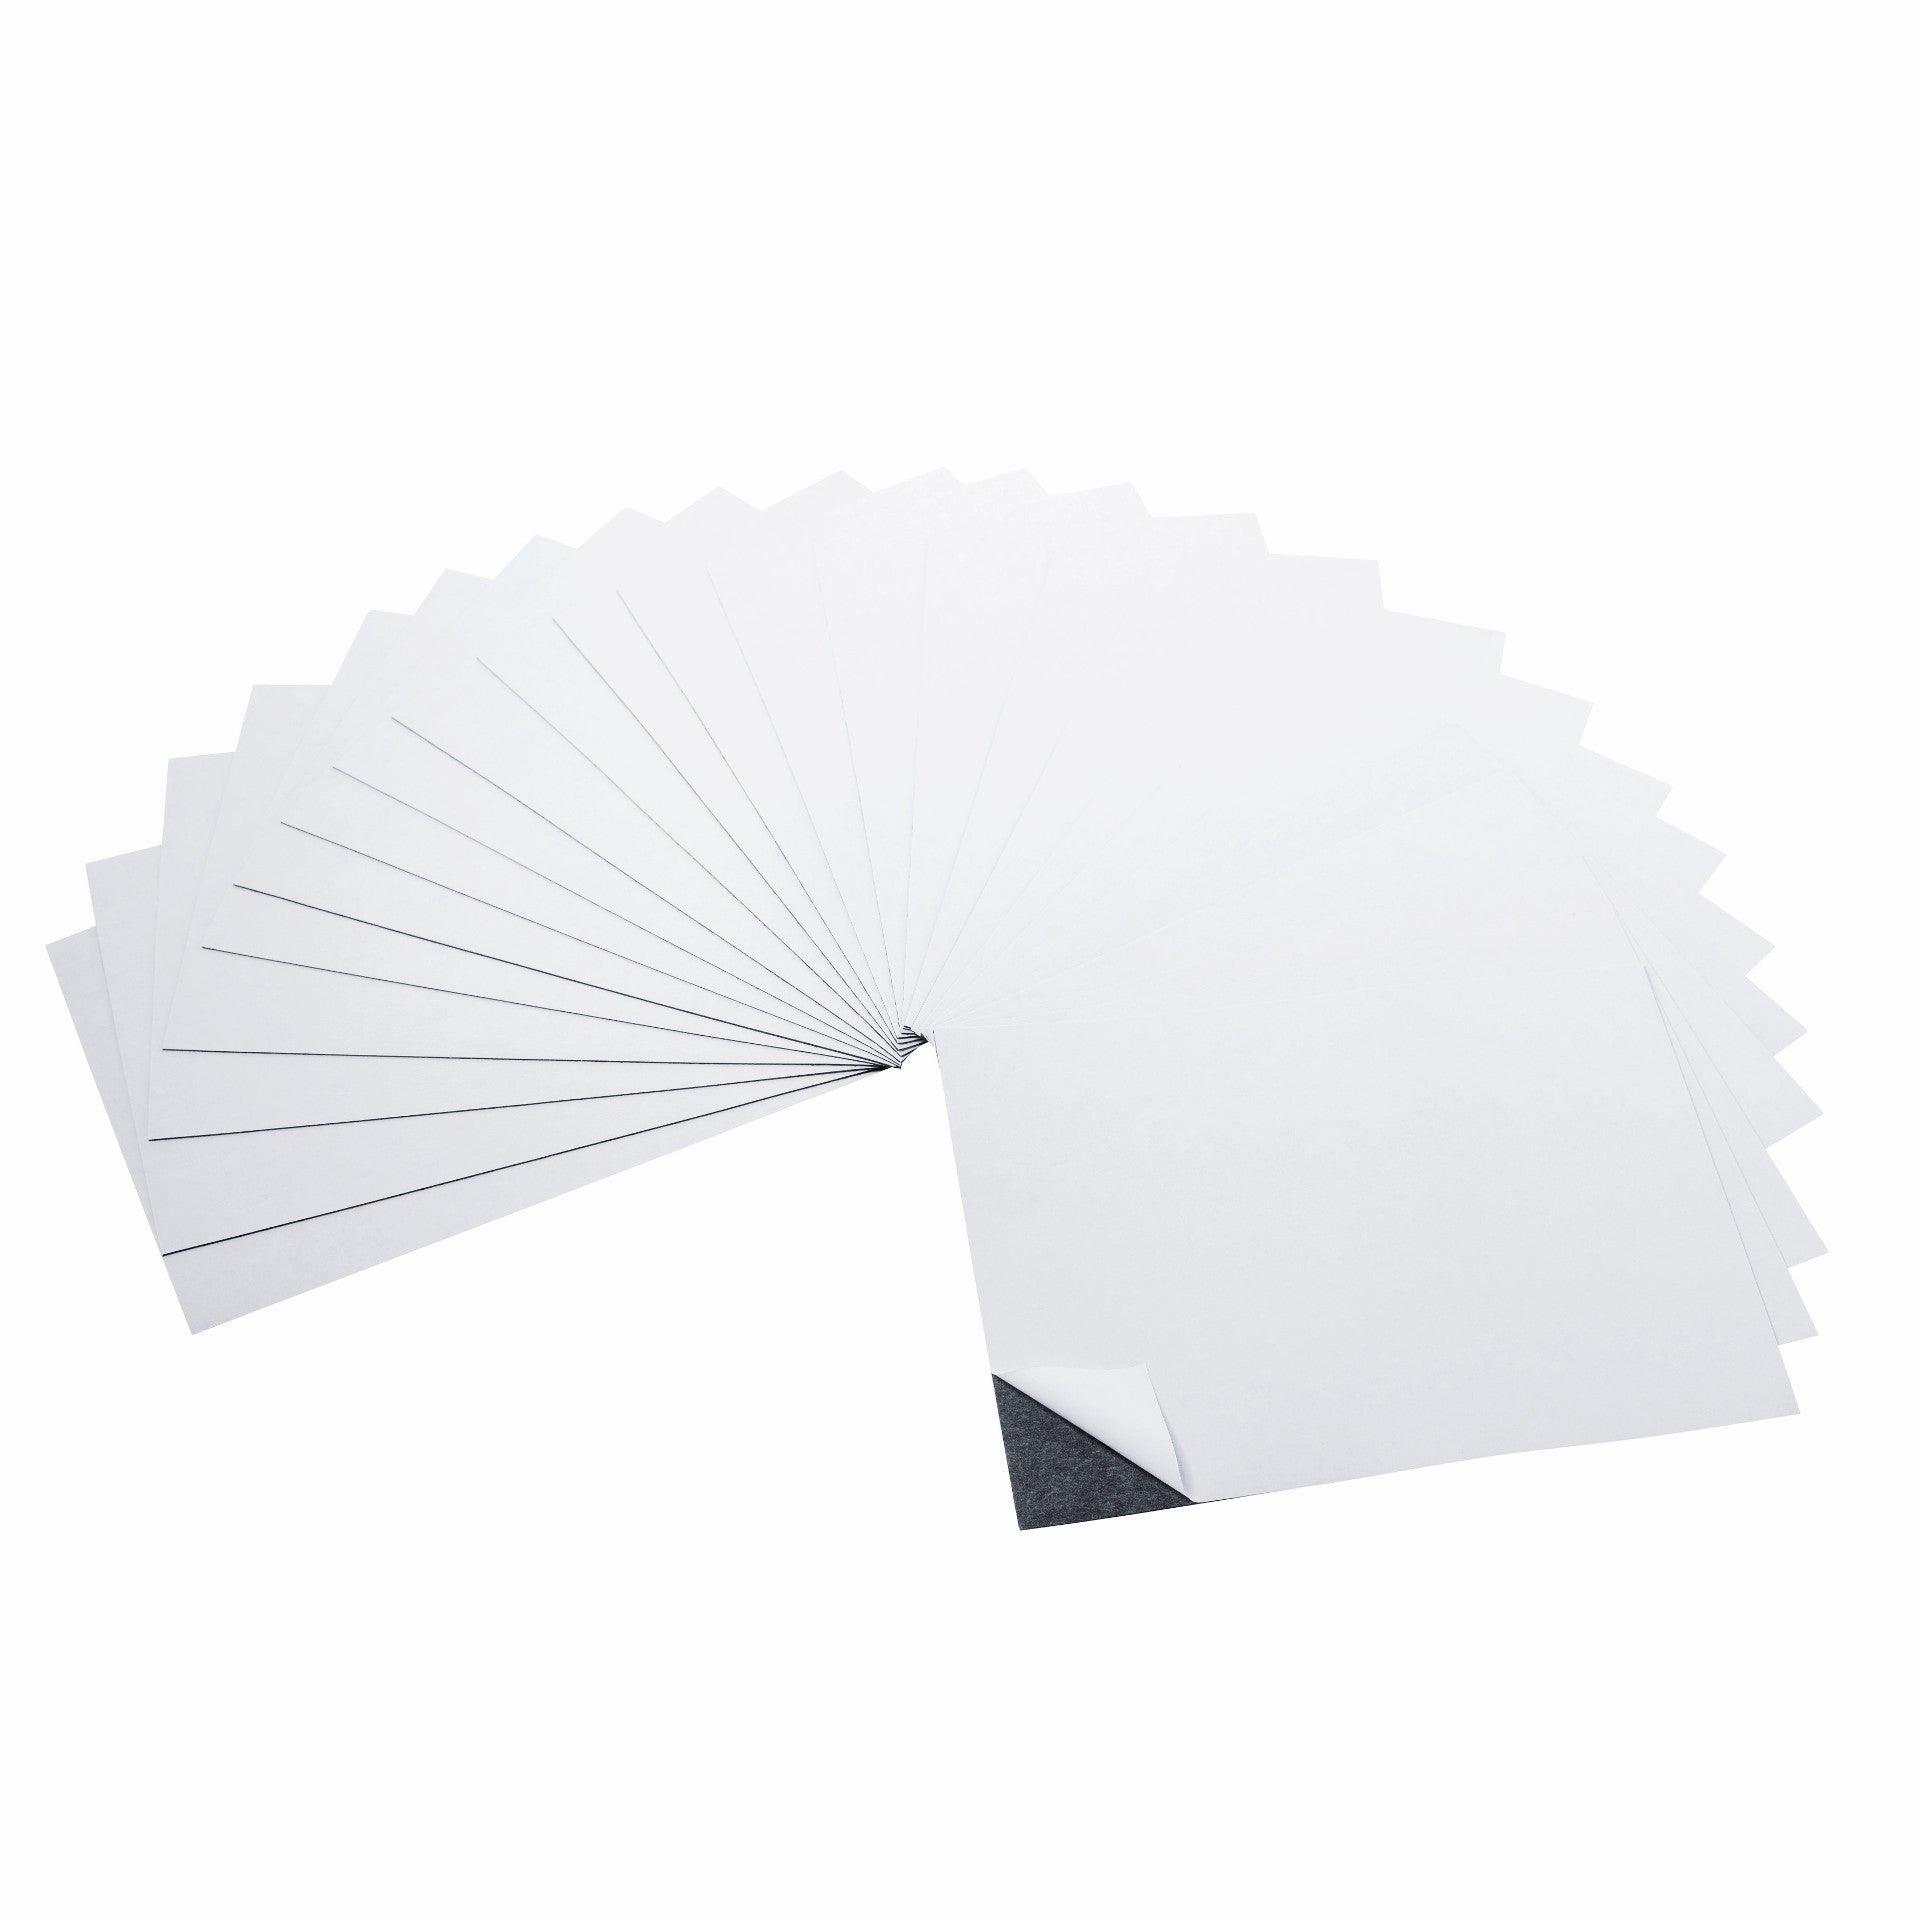 Self Adhesive Business Card Magnets, Peel and Stick, Great Promotional  Product, Value Pack of 100